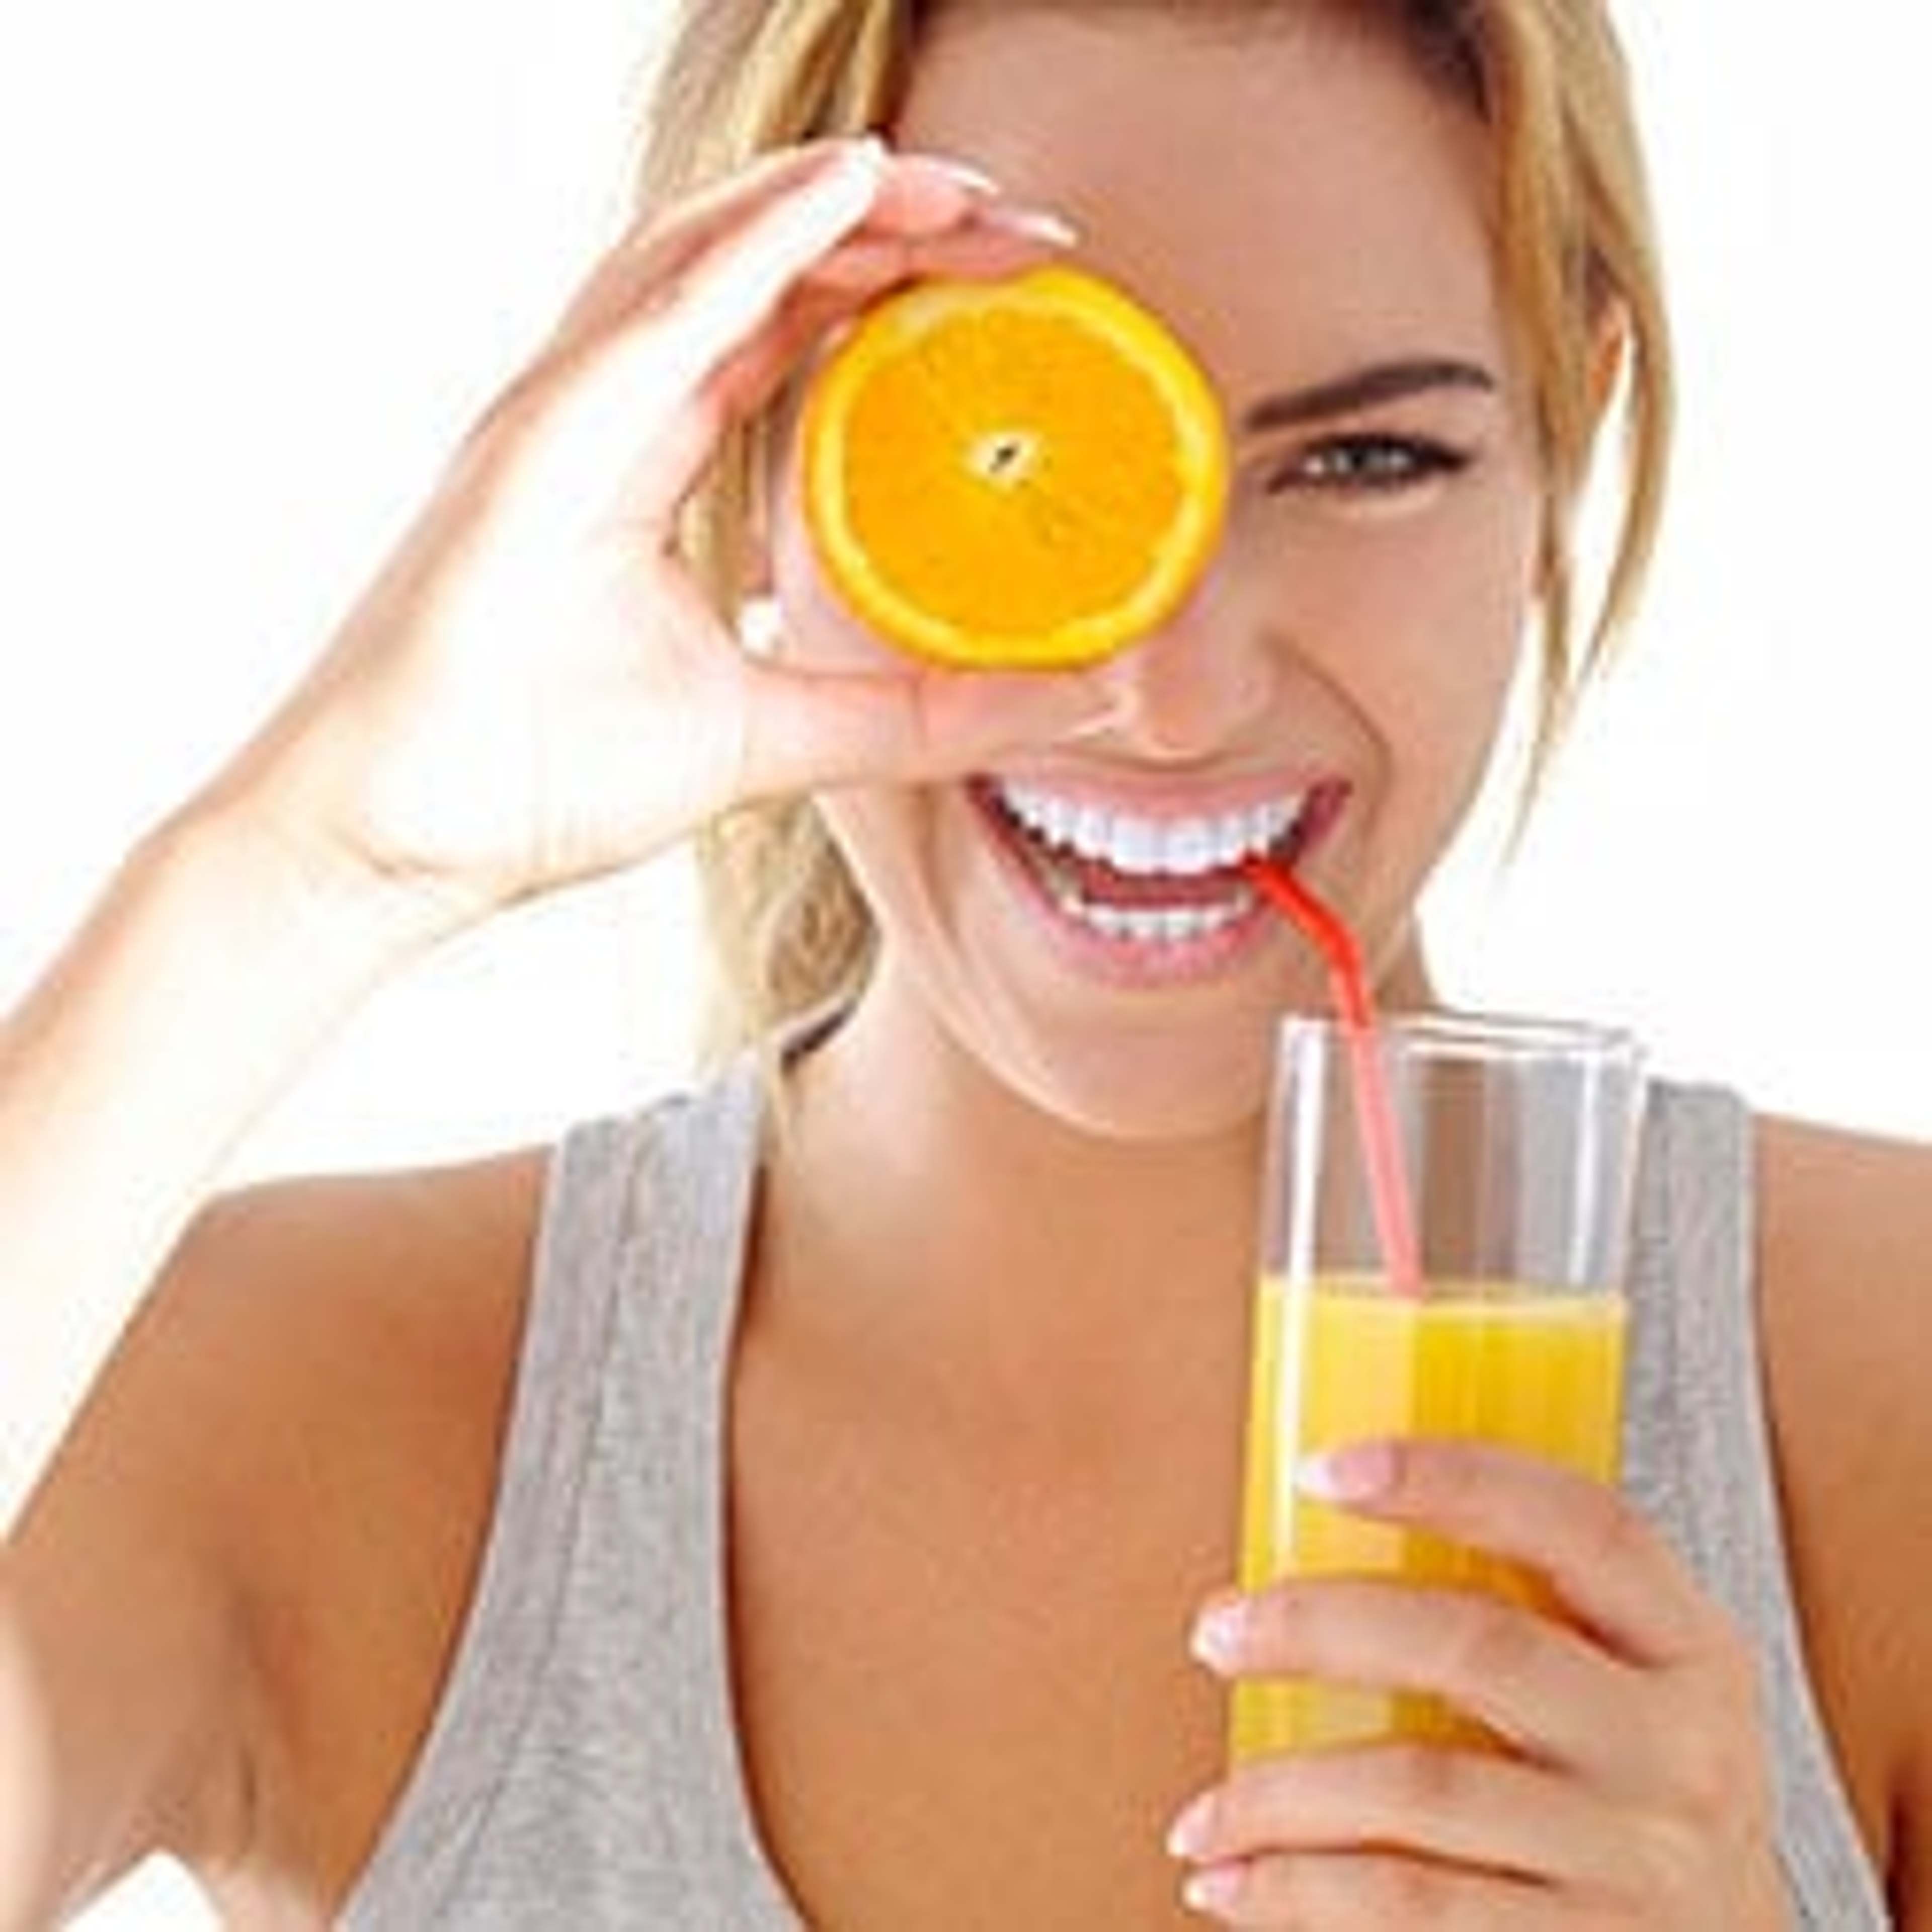 A lack of vitamin C can manifest itself in the form of frequent colds, weak connective tissue, bleeding gums, and poorly healing wounds.